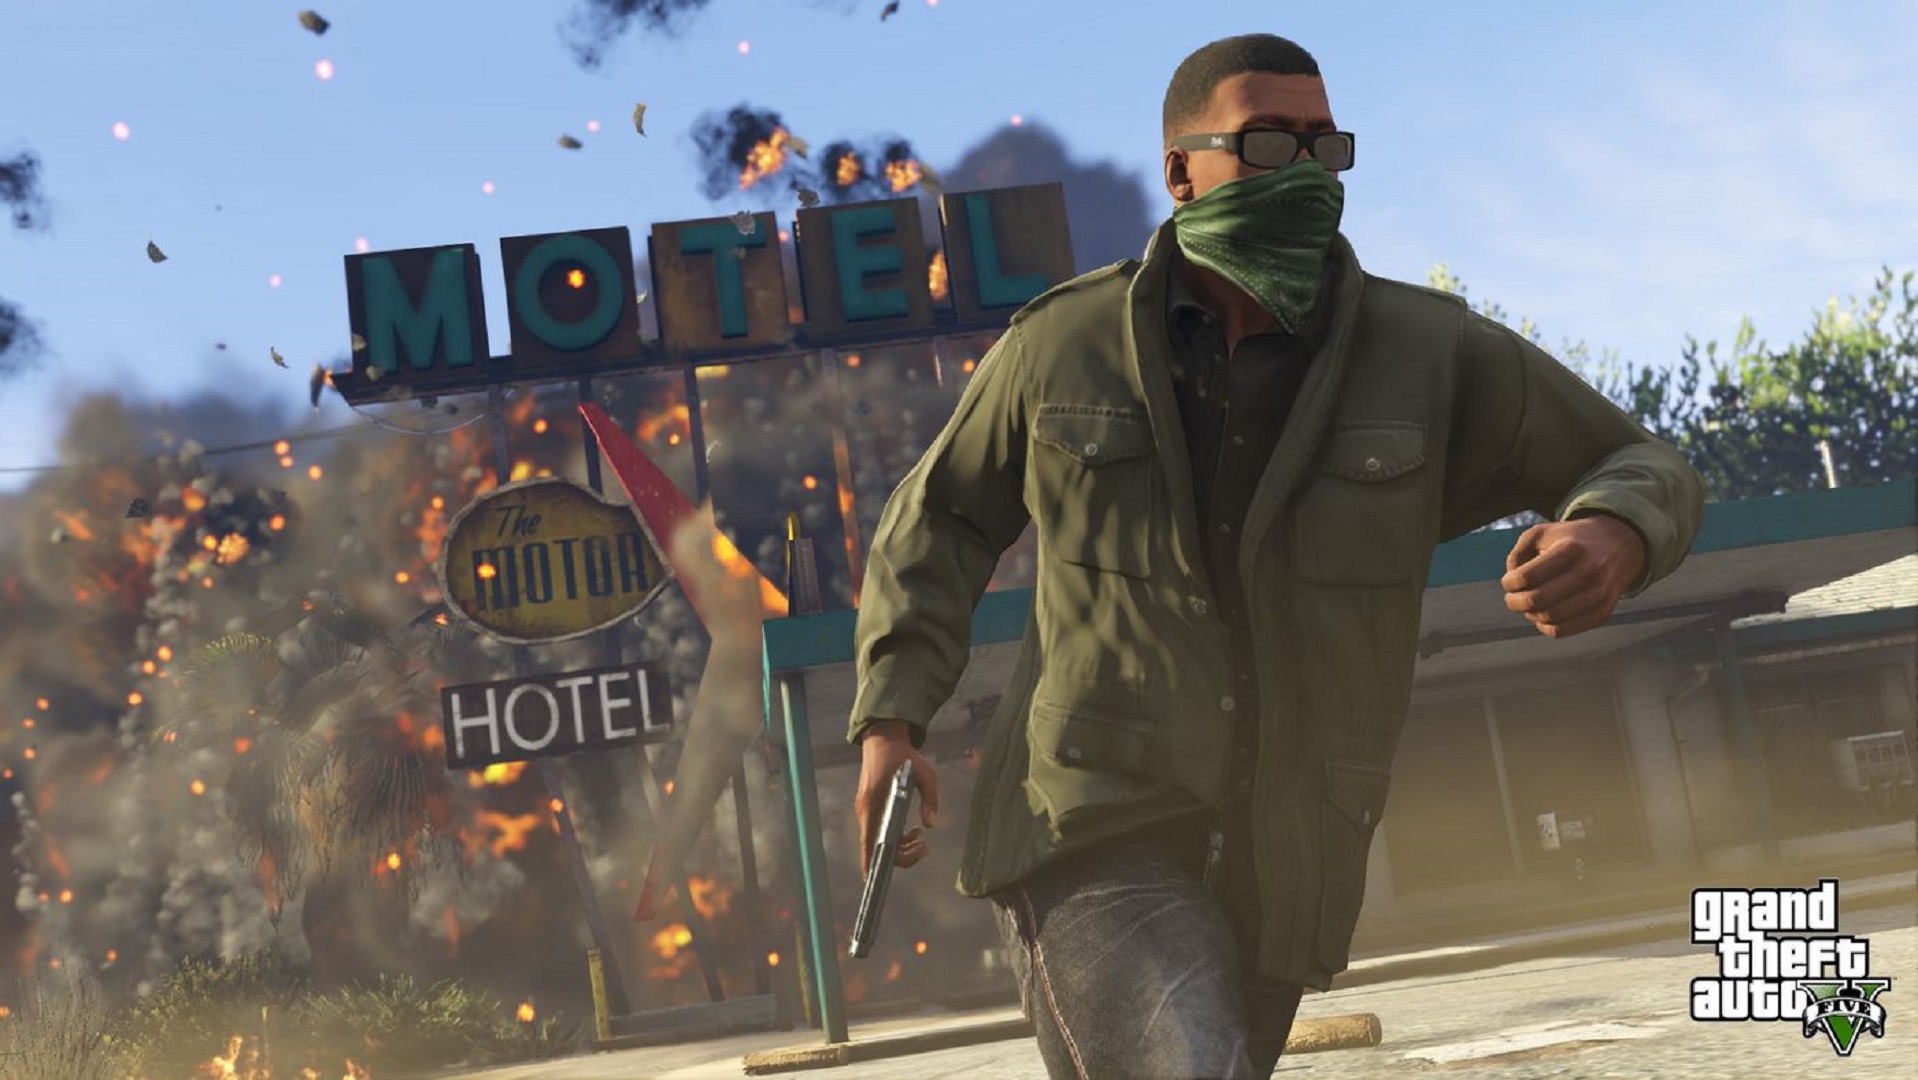 Grand Theft Auto 6 Will Reportedly Not be Released Until 2025